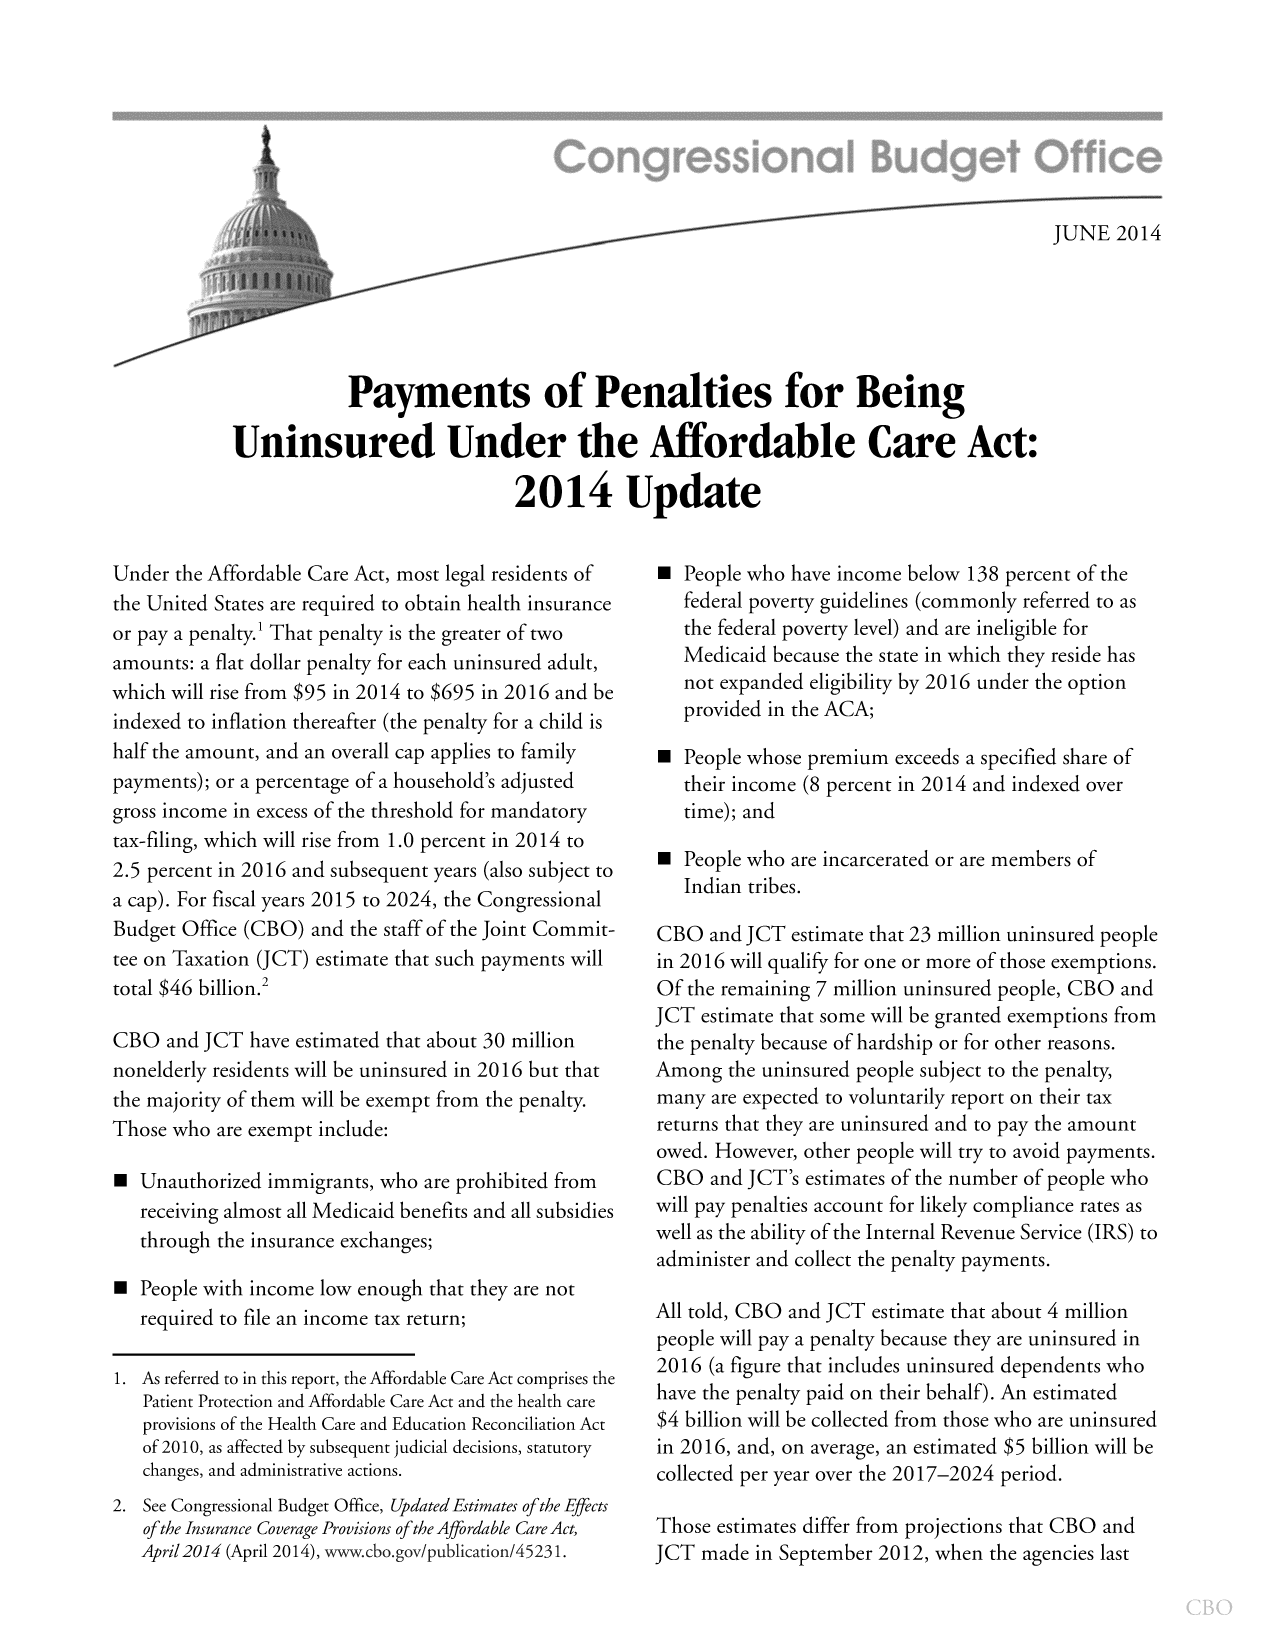 handle is hein.congrec/cbo1807 and id is 1 raw text is: JUNE 2014
Payments of Penalties for Being
Uninsured Under the Affordable Care Act:
2014 Update

Under the Affordable Care Act, most legal residents of
the United States are required to obtain health insurance
or pay a penalty.' That penalty is the greater of two
amounts: a flat dollar penalty for each uninsured adult,
which will rise from $95 in 2014 to $695 in 2016 and be
indexed to inflation thereafter (the penalty for a child is
half the amount, and an overall cap applies to family
payments); or a percentage of a household's adjusted
gross income in excess of the threshold for mandatory
tax-filing, which will rise from 1.0 percent in 2014 to
2.5 percent in 2016 and subsequent years (also subject to
a cap). For fiscal years 2015 to 2024, the Congressional
Budget Office (CBO) and the staff of the Joint Commit-
tee on Taxation (JCT) estimate that such payments will
total $46 billion.2
CBO and JCT have estimated that about 30 million
nonelderly residents will be uninsured in 2016 but that
the majority of them will be exempt from the penalty.
Those who are exempt include:
 Unauthorized immigrants, who are prohibited from
receiving almost all Medicaid benefits and all subsidies
through the insurance exchanges;
 People with income low enough that they are not
required to file an income tax return;
1. As referred to in this report, the Affordable Care Act comprises the
Patient Protection and Affordable Care Act and the health care
provisions of the Health Care and Education Reconciliation Act
of 2010, as affected by subsequent judicial decisions, statutory
changes, and administrative actions.
2. See Congressional Budget Office, Updated Estimates ofthe Effects
of the Insurance Coverage Provisions of the Affordable Care Act,
April2014 (April 2014), www.cbo.gov/publication/45231.

 People who have income below 138 percent of the
federal poverty guidelines (commonly referred to as
the federal poverty level) and are ineligible for
Medicaid because the state in which they reside has
not expanded eligibility by 2016 under the option
provided in the ACA;
 People whose premium exceeds a specified share of
their income (8 percent in 2014 and indexed over
time); and
 People who are incarcerated or are members of
Indian tribes.
CBO and JCT estimate that 23 million uninsured people
in 2016 will qualify for one or more of those exemptions.
Of the remaining 7 million uninsured people, CBO and
JCT estimate that some will be granted exemptions from
the penalty because of hardship or for other reasons.
Among the uninsured people subject to the penalty,
many are expected to voluntarily report on their tax
returns that they are uninsured and to pay the amount
owed. However, other people will try to avoid payments.
CBO and JCT's estimates of the number of people who
will pay penalties account for likely compliance rates as
well as the ability of the Internal Revenue Service (IRS) to
administer and collect the penalty payments.
All told, CBO and JCT estimate that about 4 million
people will pay a penalty because they are uninsured in
2016 (a figure that includes uninsured dependents who
have the penalty paid on their behalf). An estimated
$4 billion will be collected from those who are uninsured
in 2016, and, on average, an estimated $5 billion will be
collected per year over the 2017-2024 period.
Those estimates differ from projections that CBO and
JCT made in September 2012, when the agencies last


